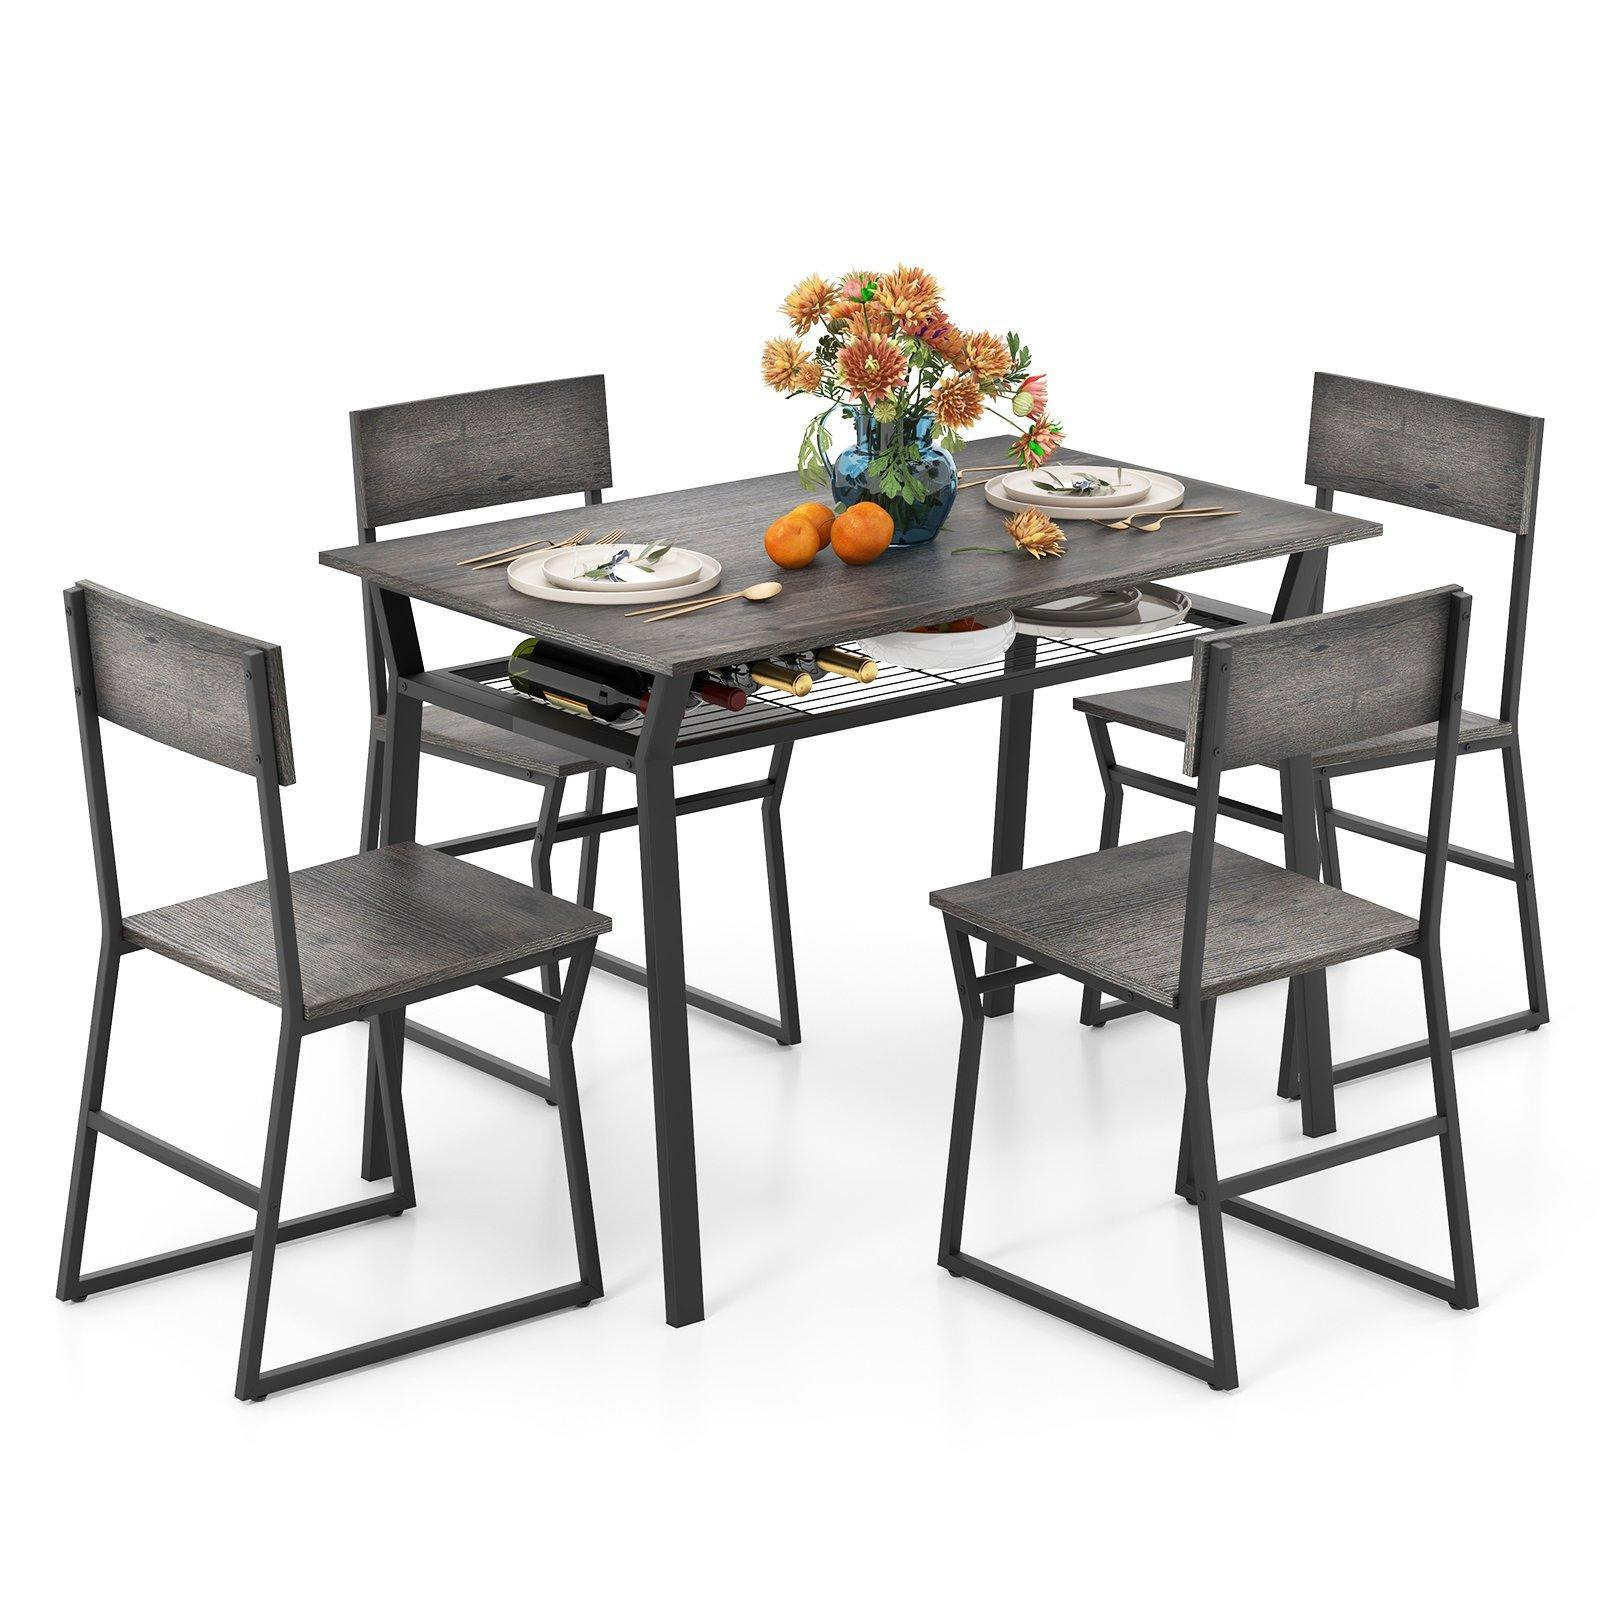 5 PCS Industrial Dining Table Set Rectangular Kitchen Table W/ 4 Chairs Metal Frame - image 1